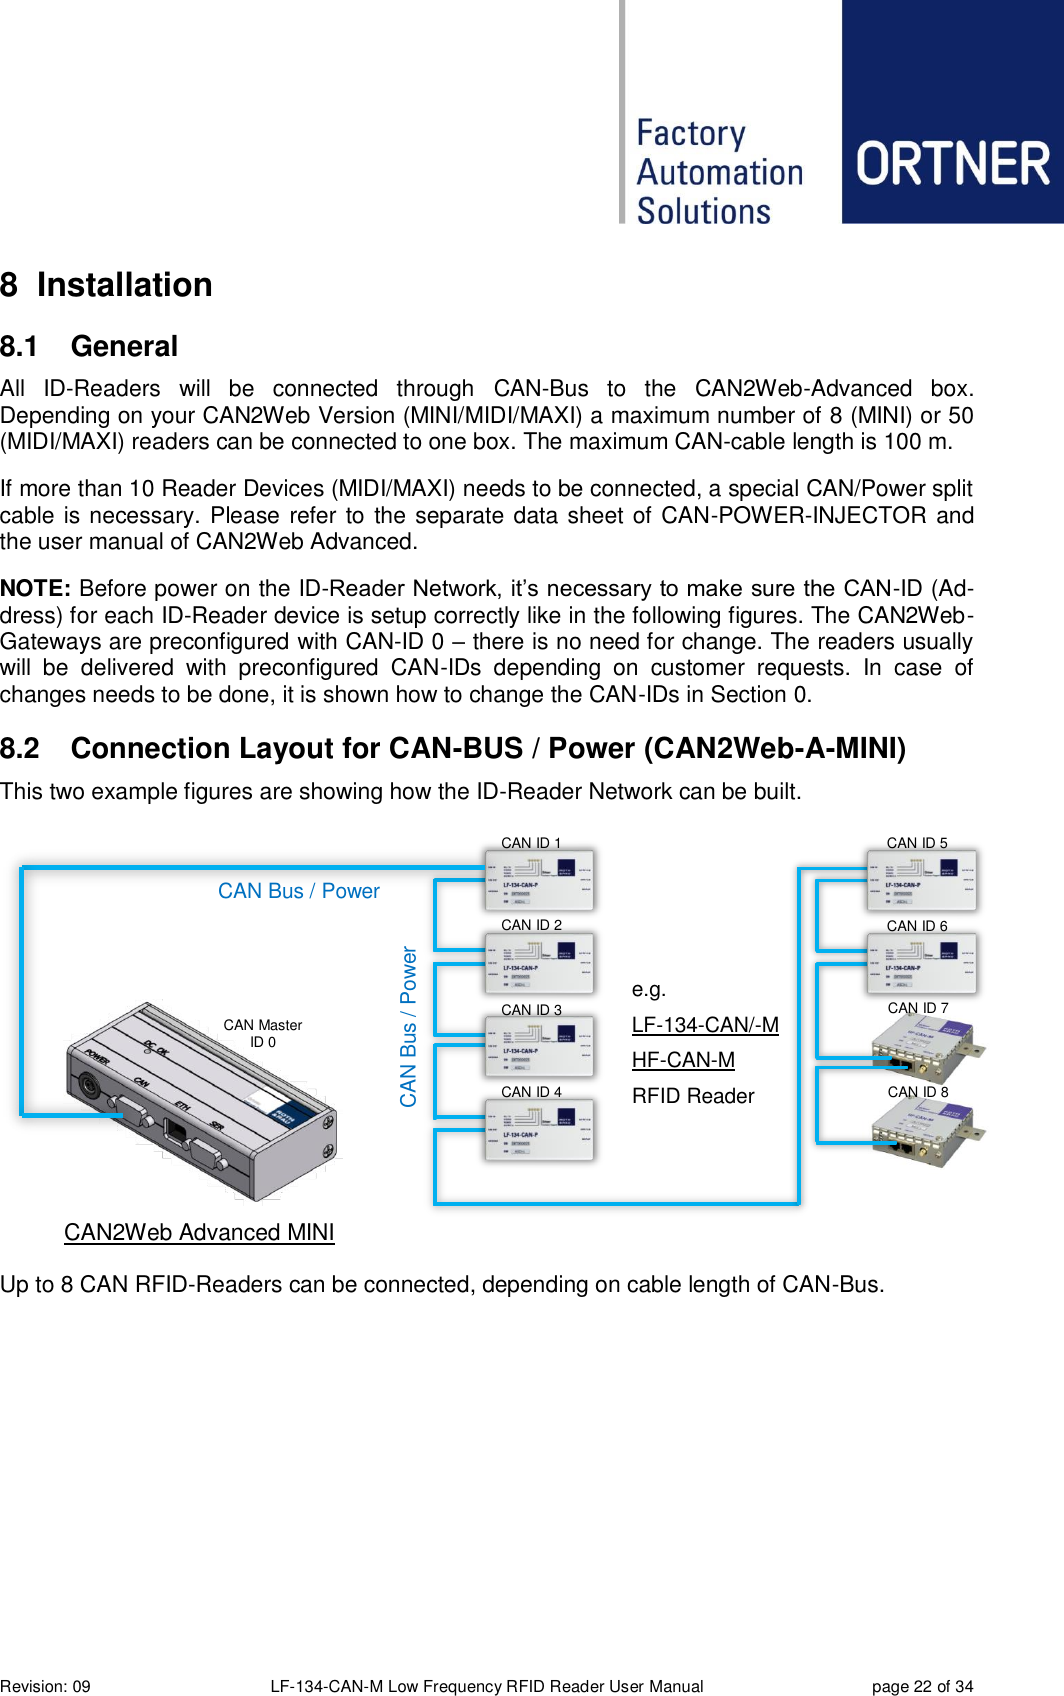  Revision: 09 LF-134-CAN-M Low Frequency RFID Reader User Manual  page 22 of 34 8  Installation 8.1  General All  ID-Readers  will  be  connected  through  CAN-Bus  to  the  CAN2Web-Advanced  box. Depending on your CAN2Web Version (MINI/MIDI/MAXI) a maximum number of 8 (MINI) or 50 (MIDI/MAXI) readers can be connected to one box. The maximum CAN-cable length is 100 m. If more than 10 Reader Devices (MIDI/MAXI) needs to be connected, a special CAN/Power split cable is necessary. Please refer to the separate data sheet of CAN-POWER-INJECTOR and the user manual of CAN2Web Advanced. NOTE: Before power on the ID-Reader Network, it’s necessary to make sure the CAN-ID (Ad-dress) for each ID-Reader device is setup correctly like in the following figures. The CAN2Web-Gateways are preconfigured with CAN-ID 0 – there is no need for change. The readers usually will  be  delivered  with  preconfigured  CAN-IDs  depending  on  customer  requests.  In  case  of changes needs to be done, it is shown how to change the CAN-IDs in Section 0. 8.2  Connection Layout for CAN-BUS / Power (CAN2Web-A-MINI) This two example figures are showing how the ID-Reader Network can be built.  Up to 8 CAN RFID-Readers can be connected, depending on cable length of CAN-Bus.  CAN Bus / Power     CAN Bus / Power CAN2Web Advanced MINI Up to 4 CAN RFID-    e.g. LF-134-CAN/-M HF-CAN-M RFID Reader CAN Master ID 0 CAN ID 2 CAN ID 1 CAN ID 3 CAN ID 4 CAN ID 5 CAN ID 6 CAN ID 7 CAN ID 8 